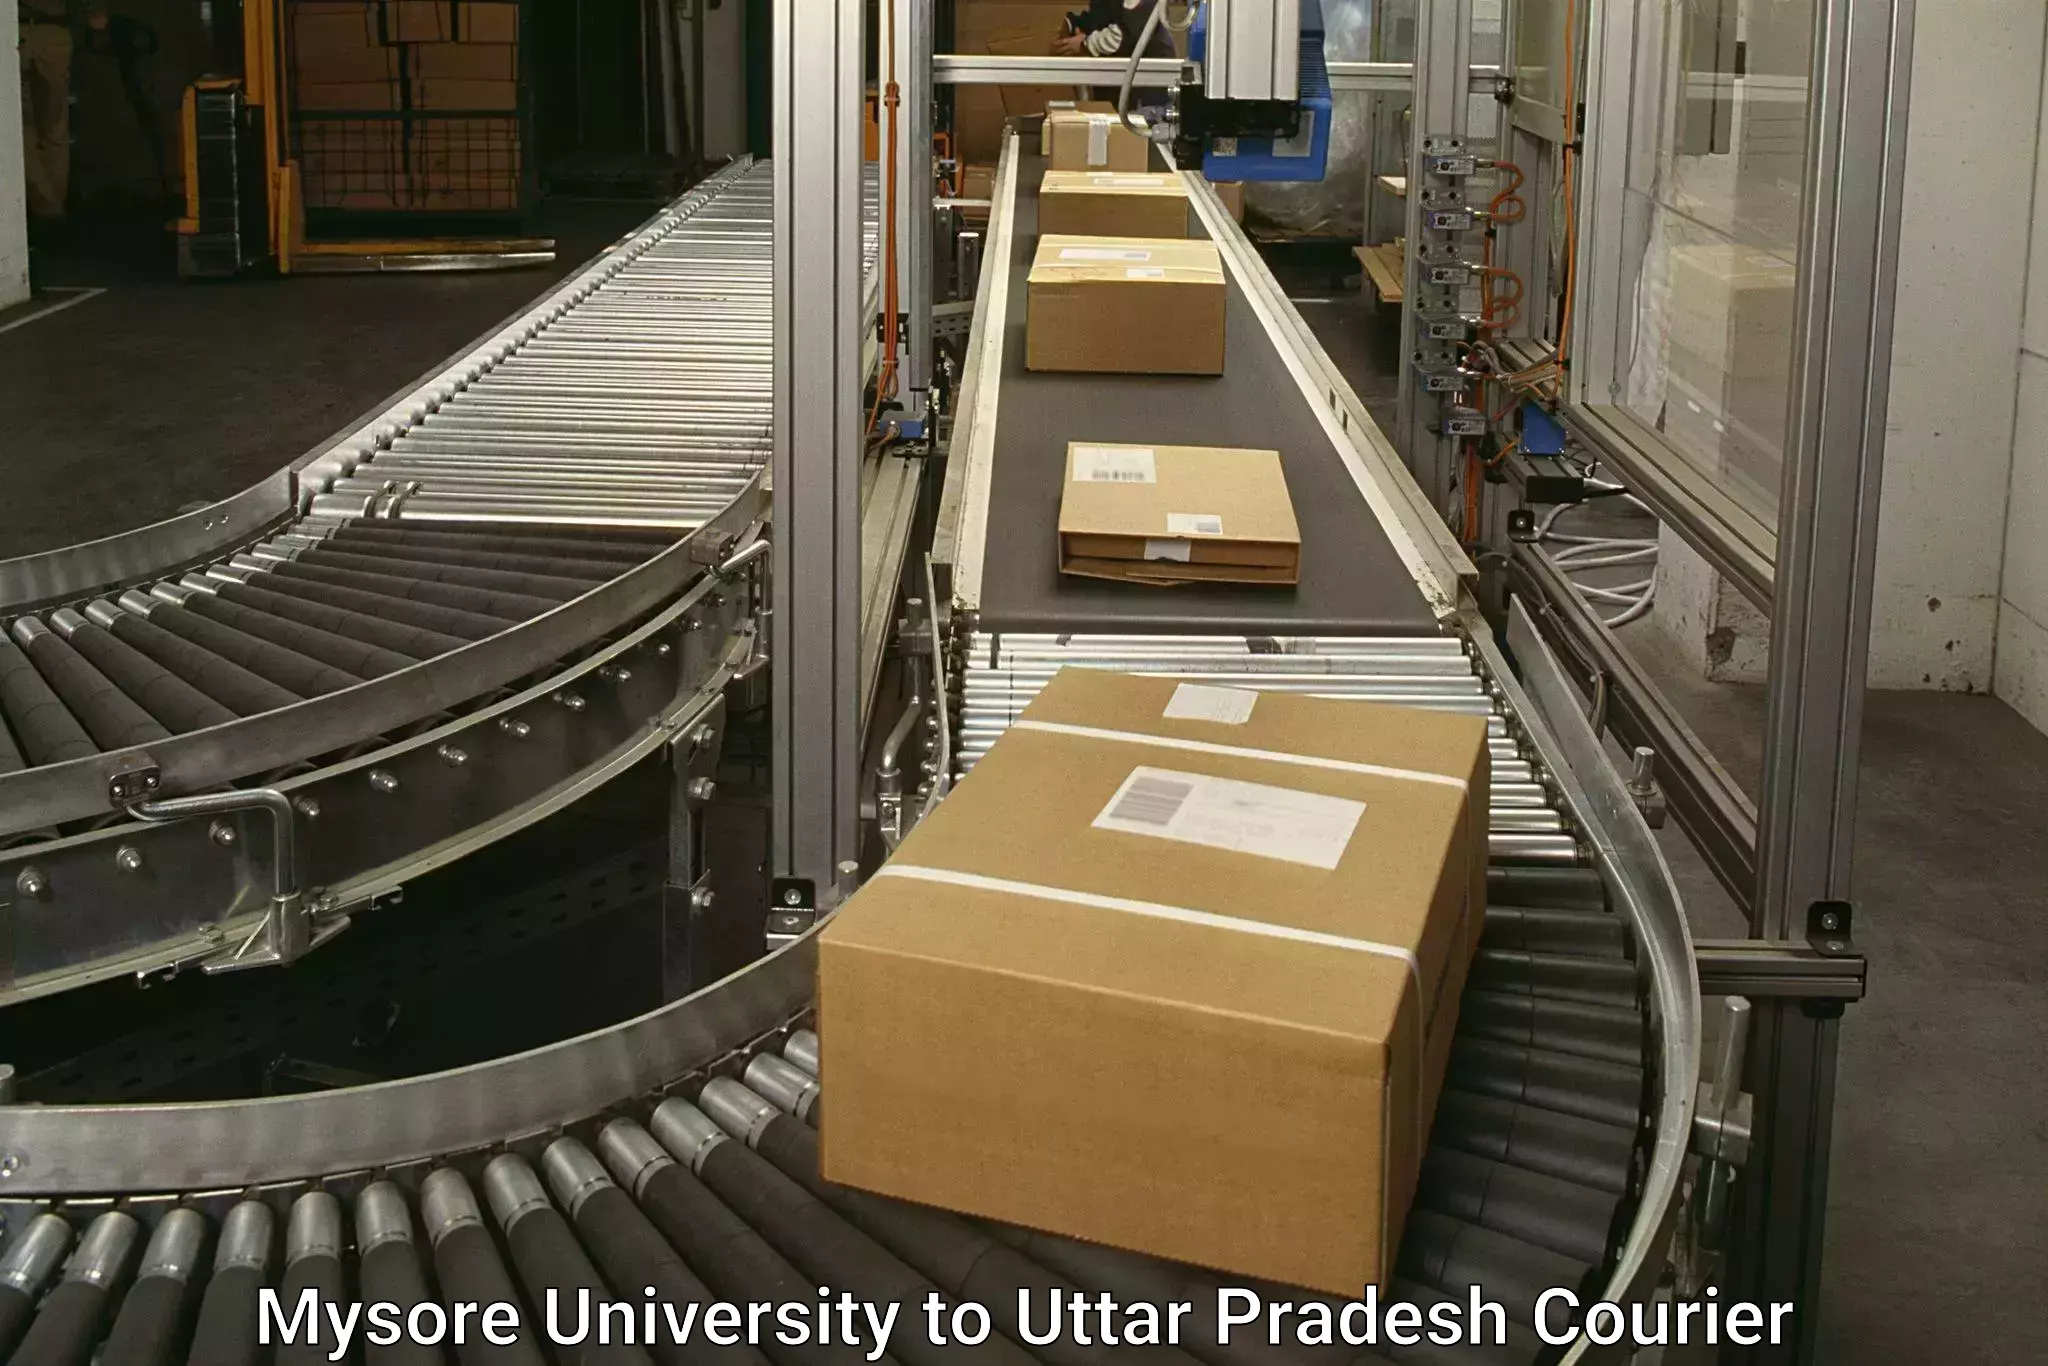 Online courier booking Mysore University to Aligarh